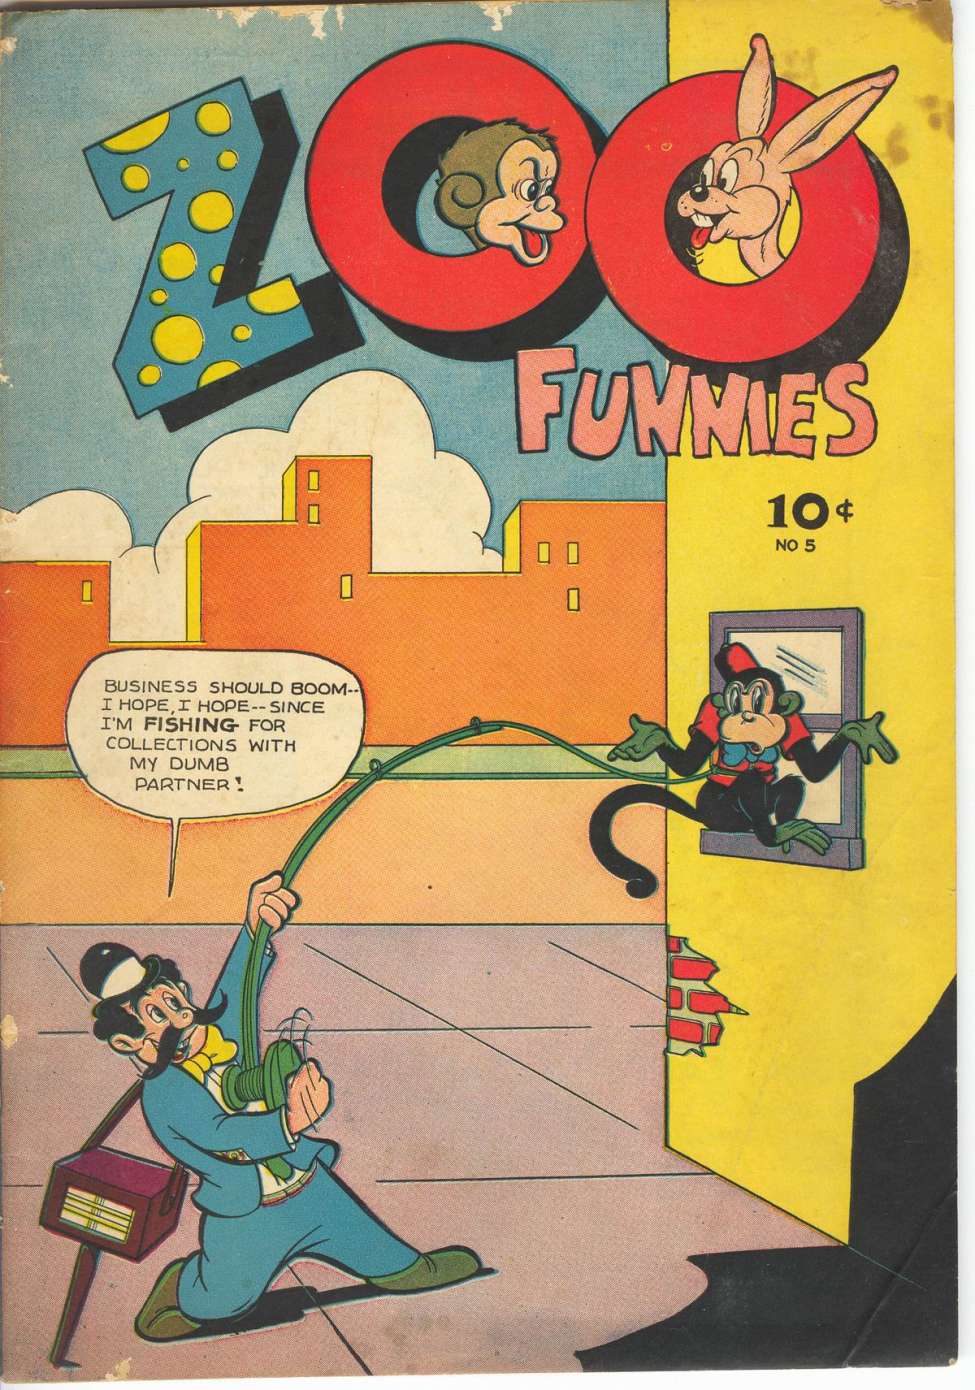 Comic Book Cover For Zoo Funnies v1 5